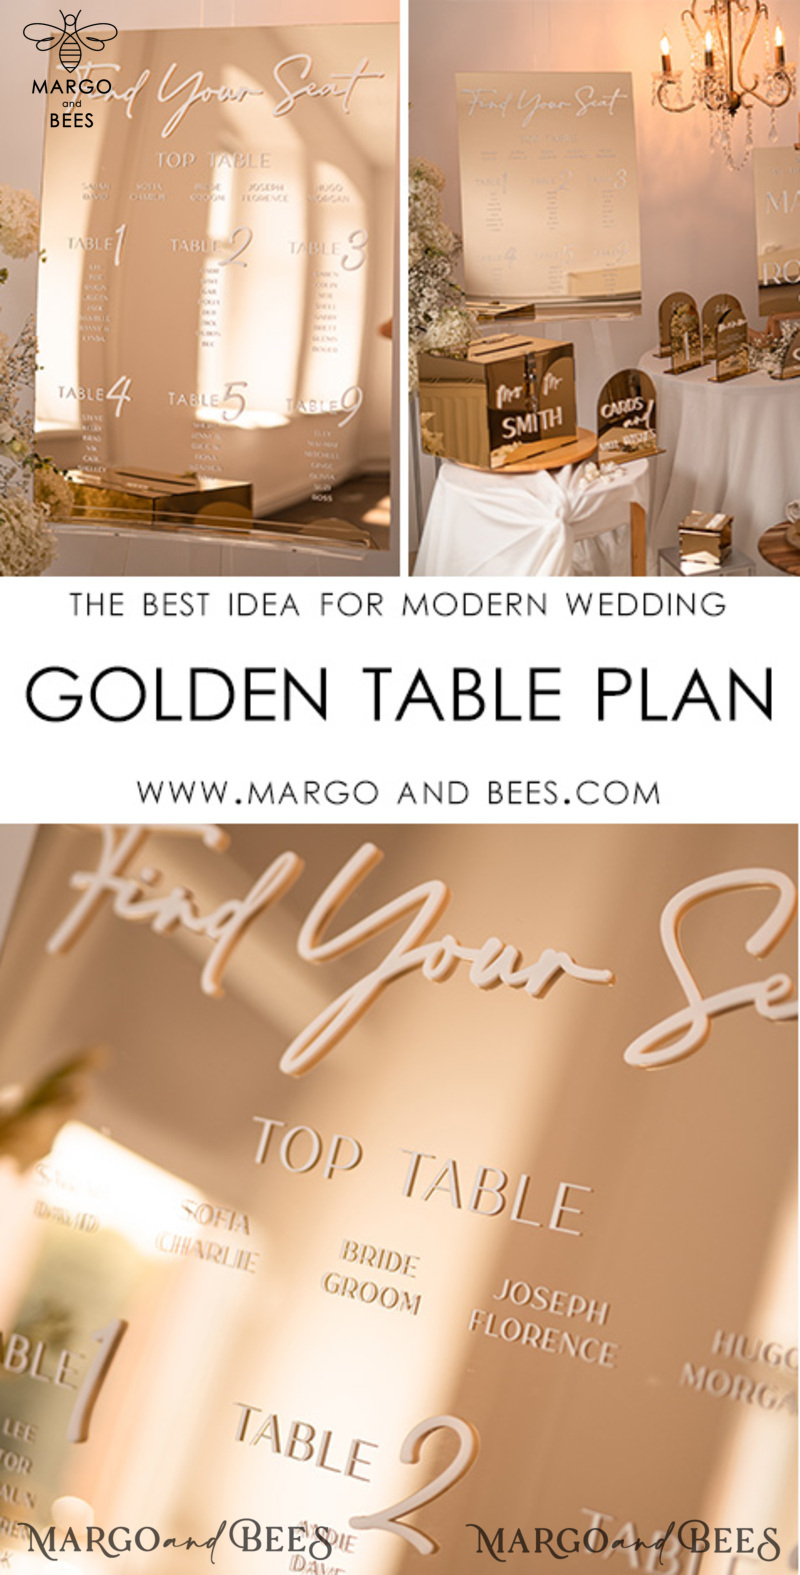 Gold Mirror Seating Chart Sign, 3d Elegant Find Your Seat - Seating Plan, Luxury Wedding Table Plan, Mirror Wedding Decoration - Golden Reception Signage - Custom Ceremony Sign-5